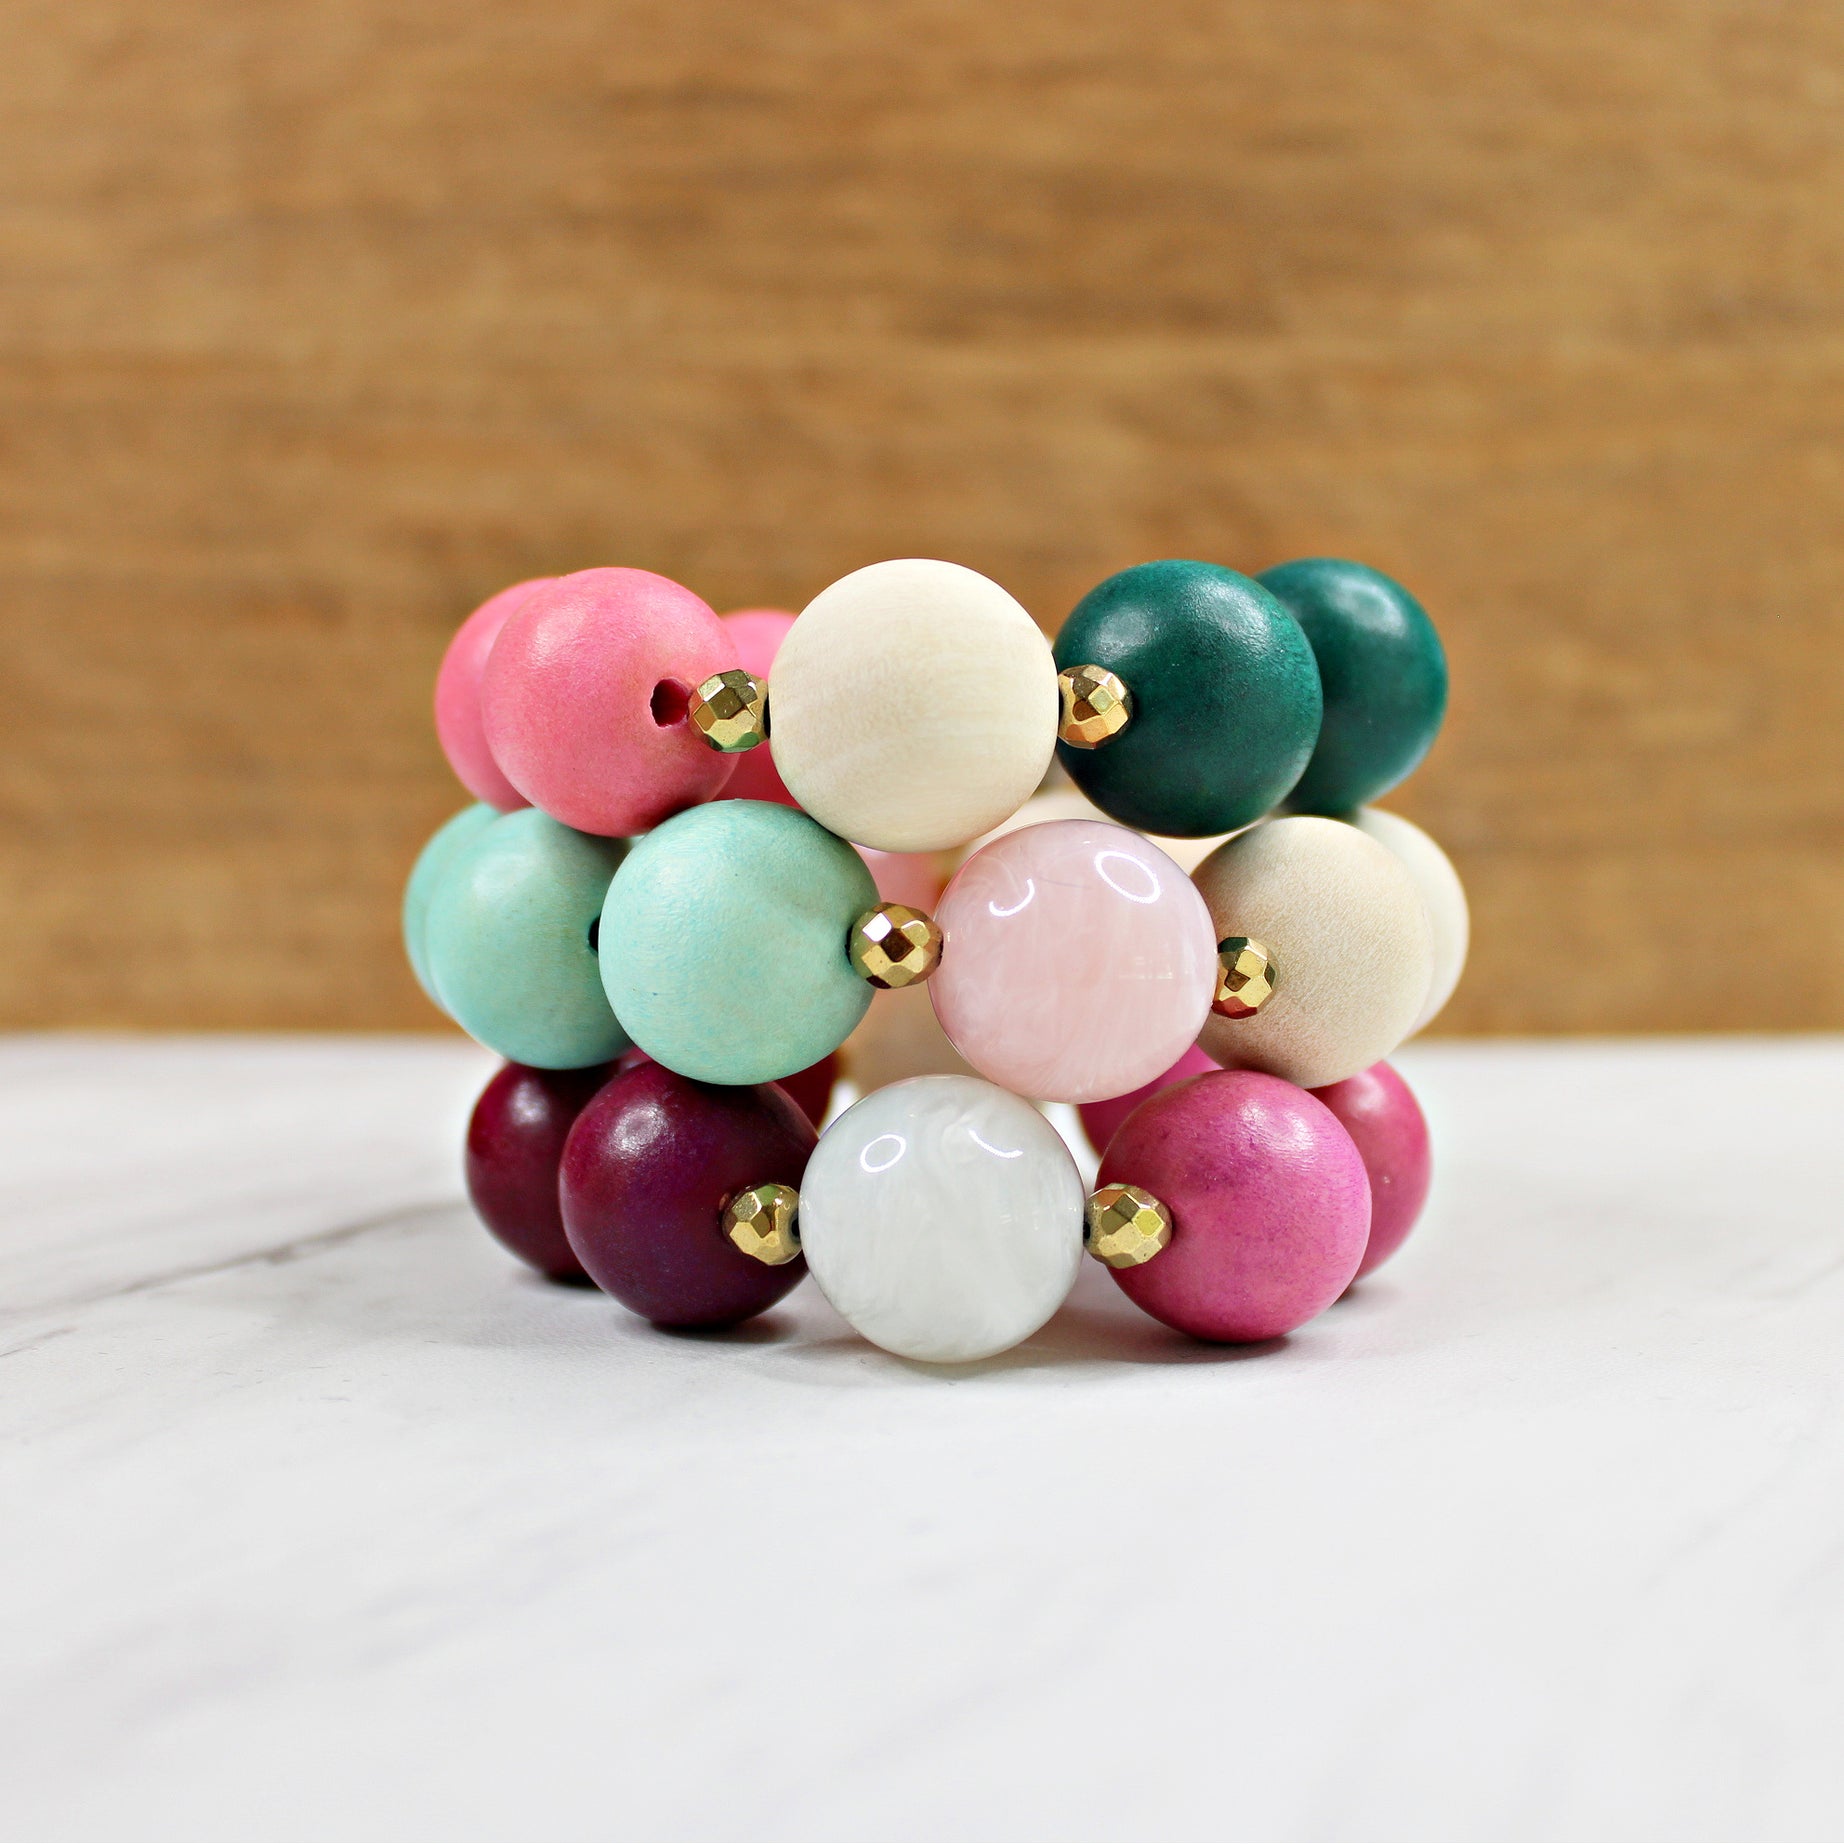 Jewel-Tone Wooden Bead Statement Stacking Bracelets for Women, Stretch